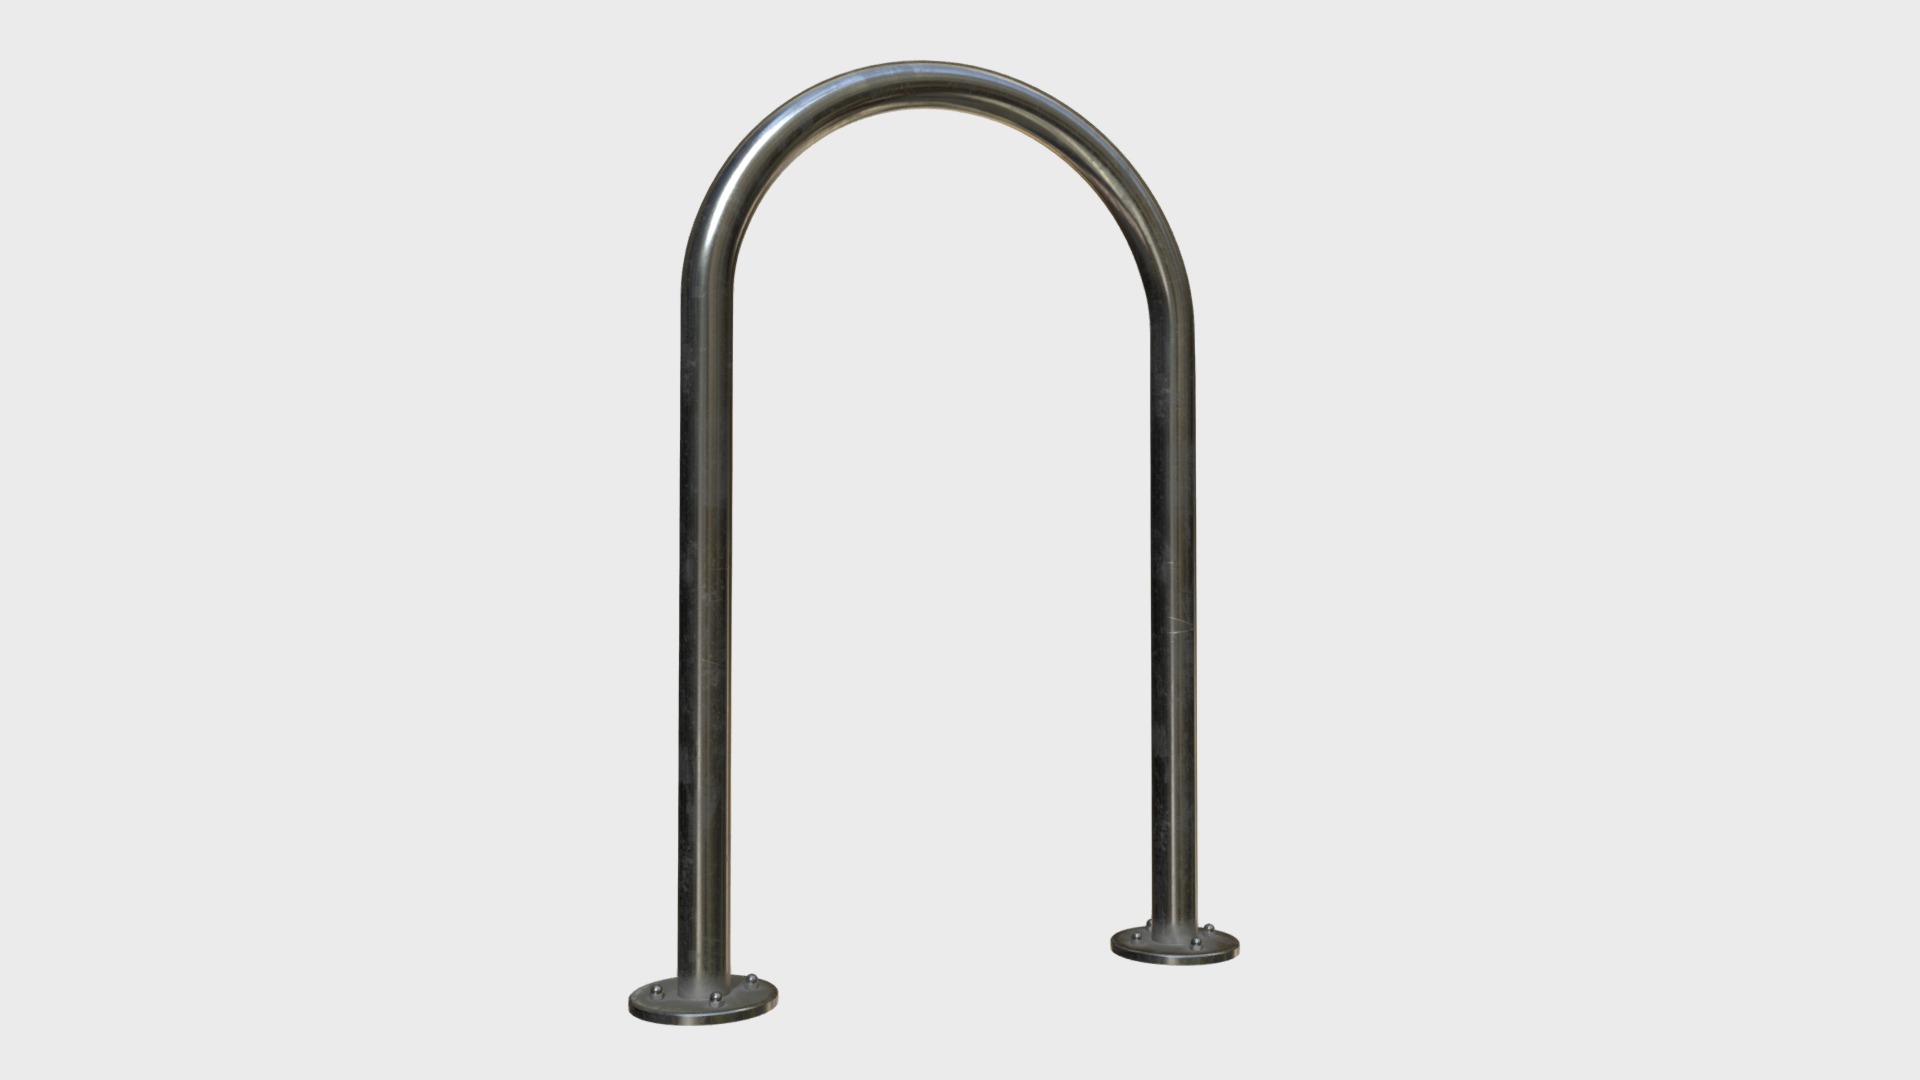 3D model Inverted U bicycle rack - This is a 3D model of the Inverted U bicycle rack. The 3D model is about a silver and black metal object.